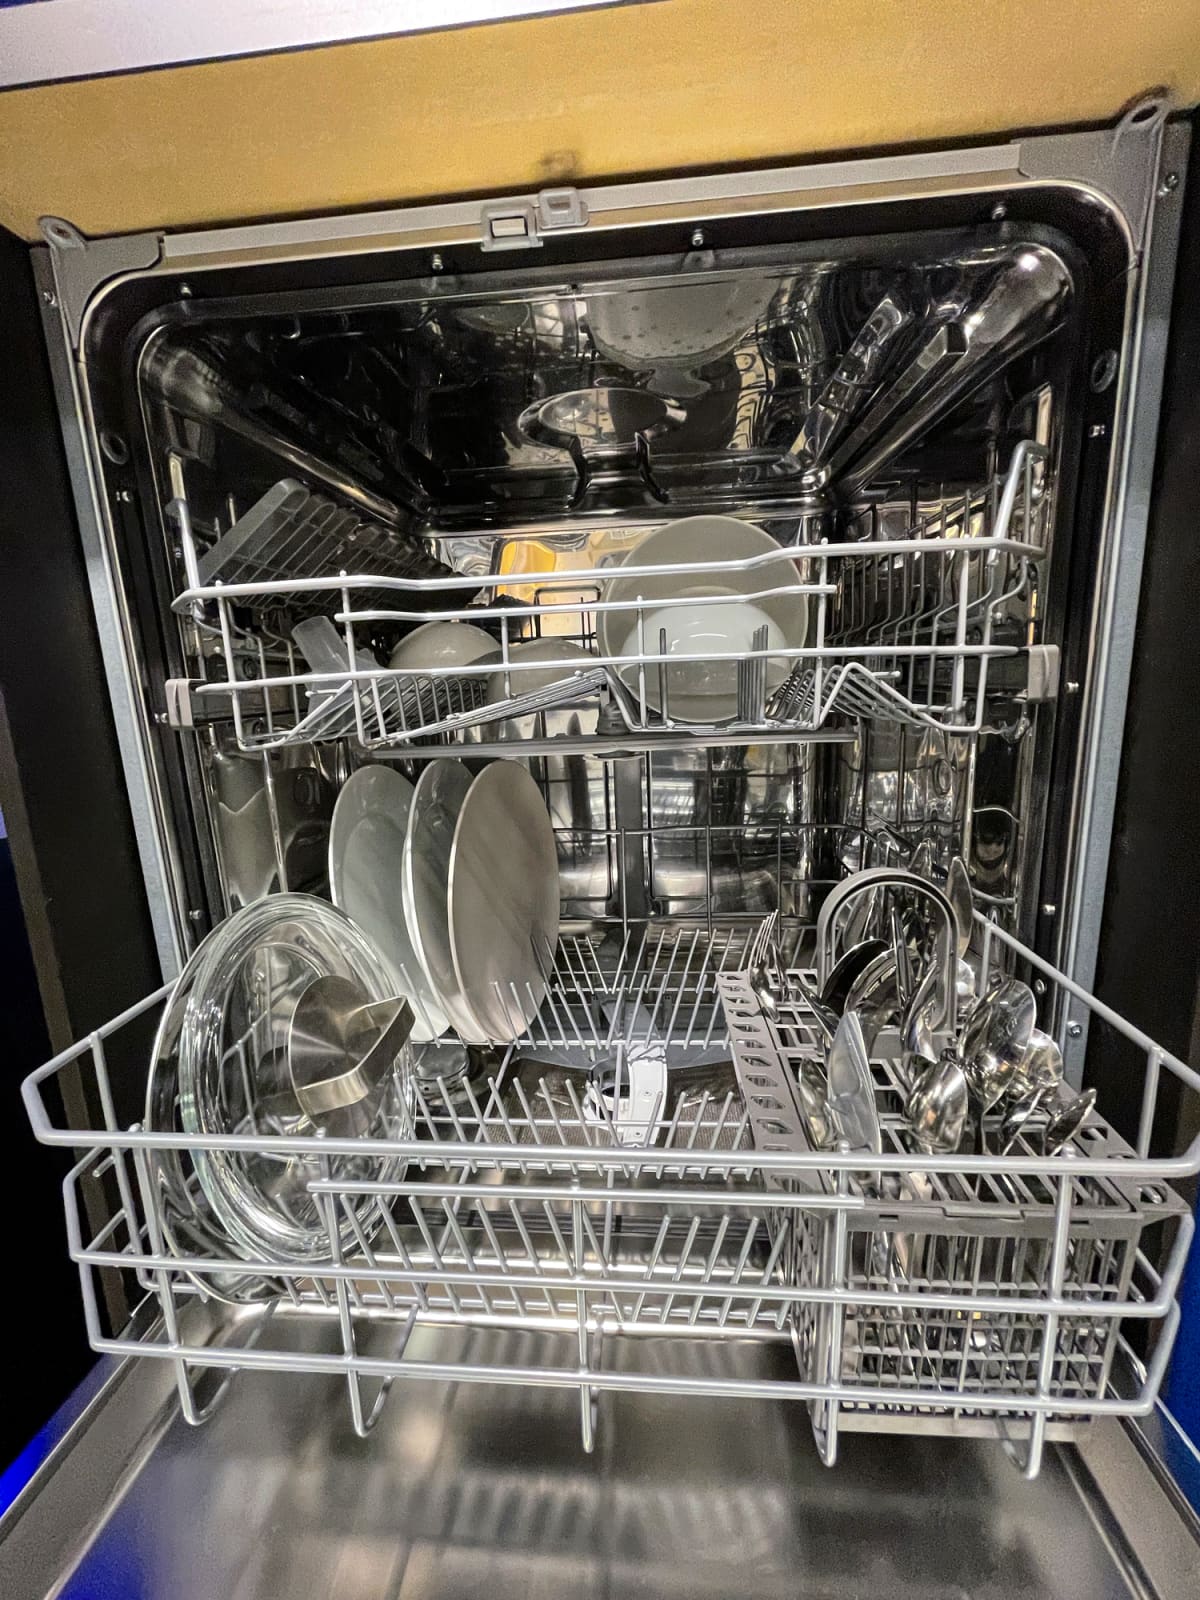 Stock photo showing close-up view of an open dishwasher half loaded with clean cutlery and crockery.